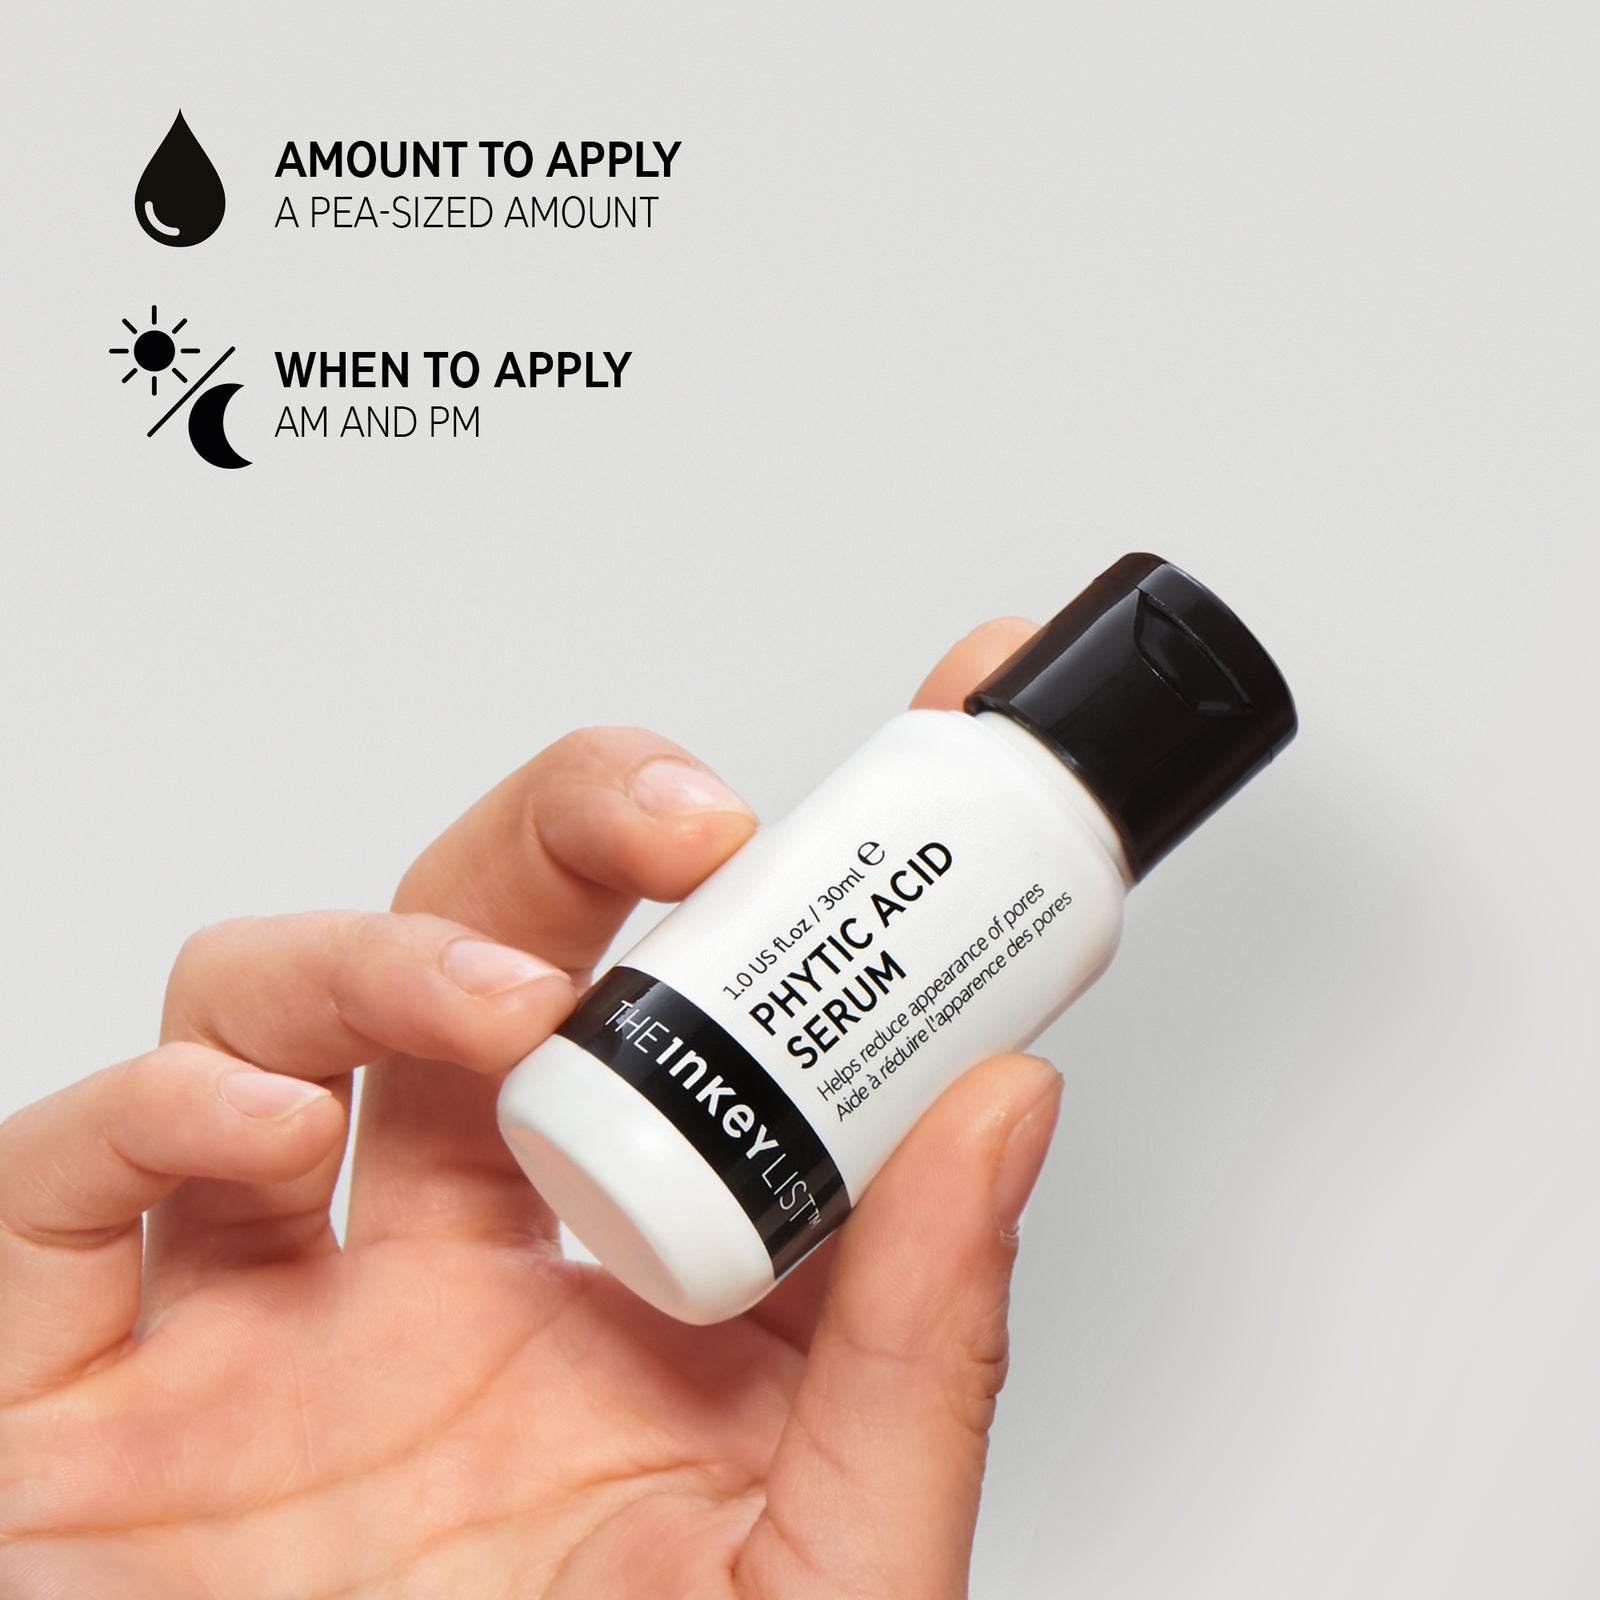 Phytic Acid Serum with text 'Amount to apply (pea-sized amount)' and 'When to apply (AM and PM)'